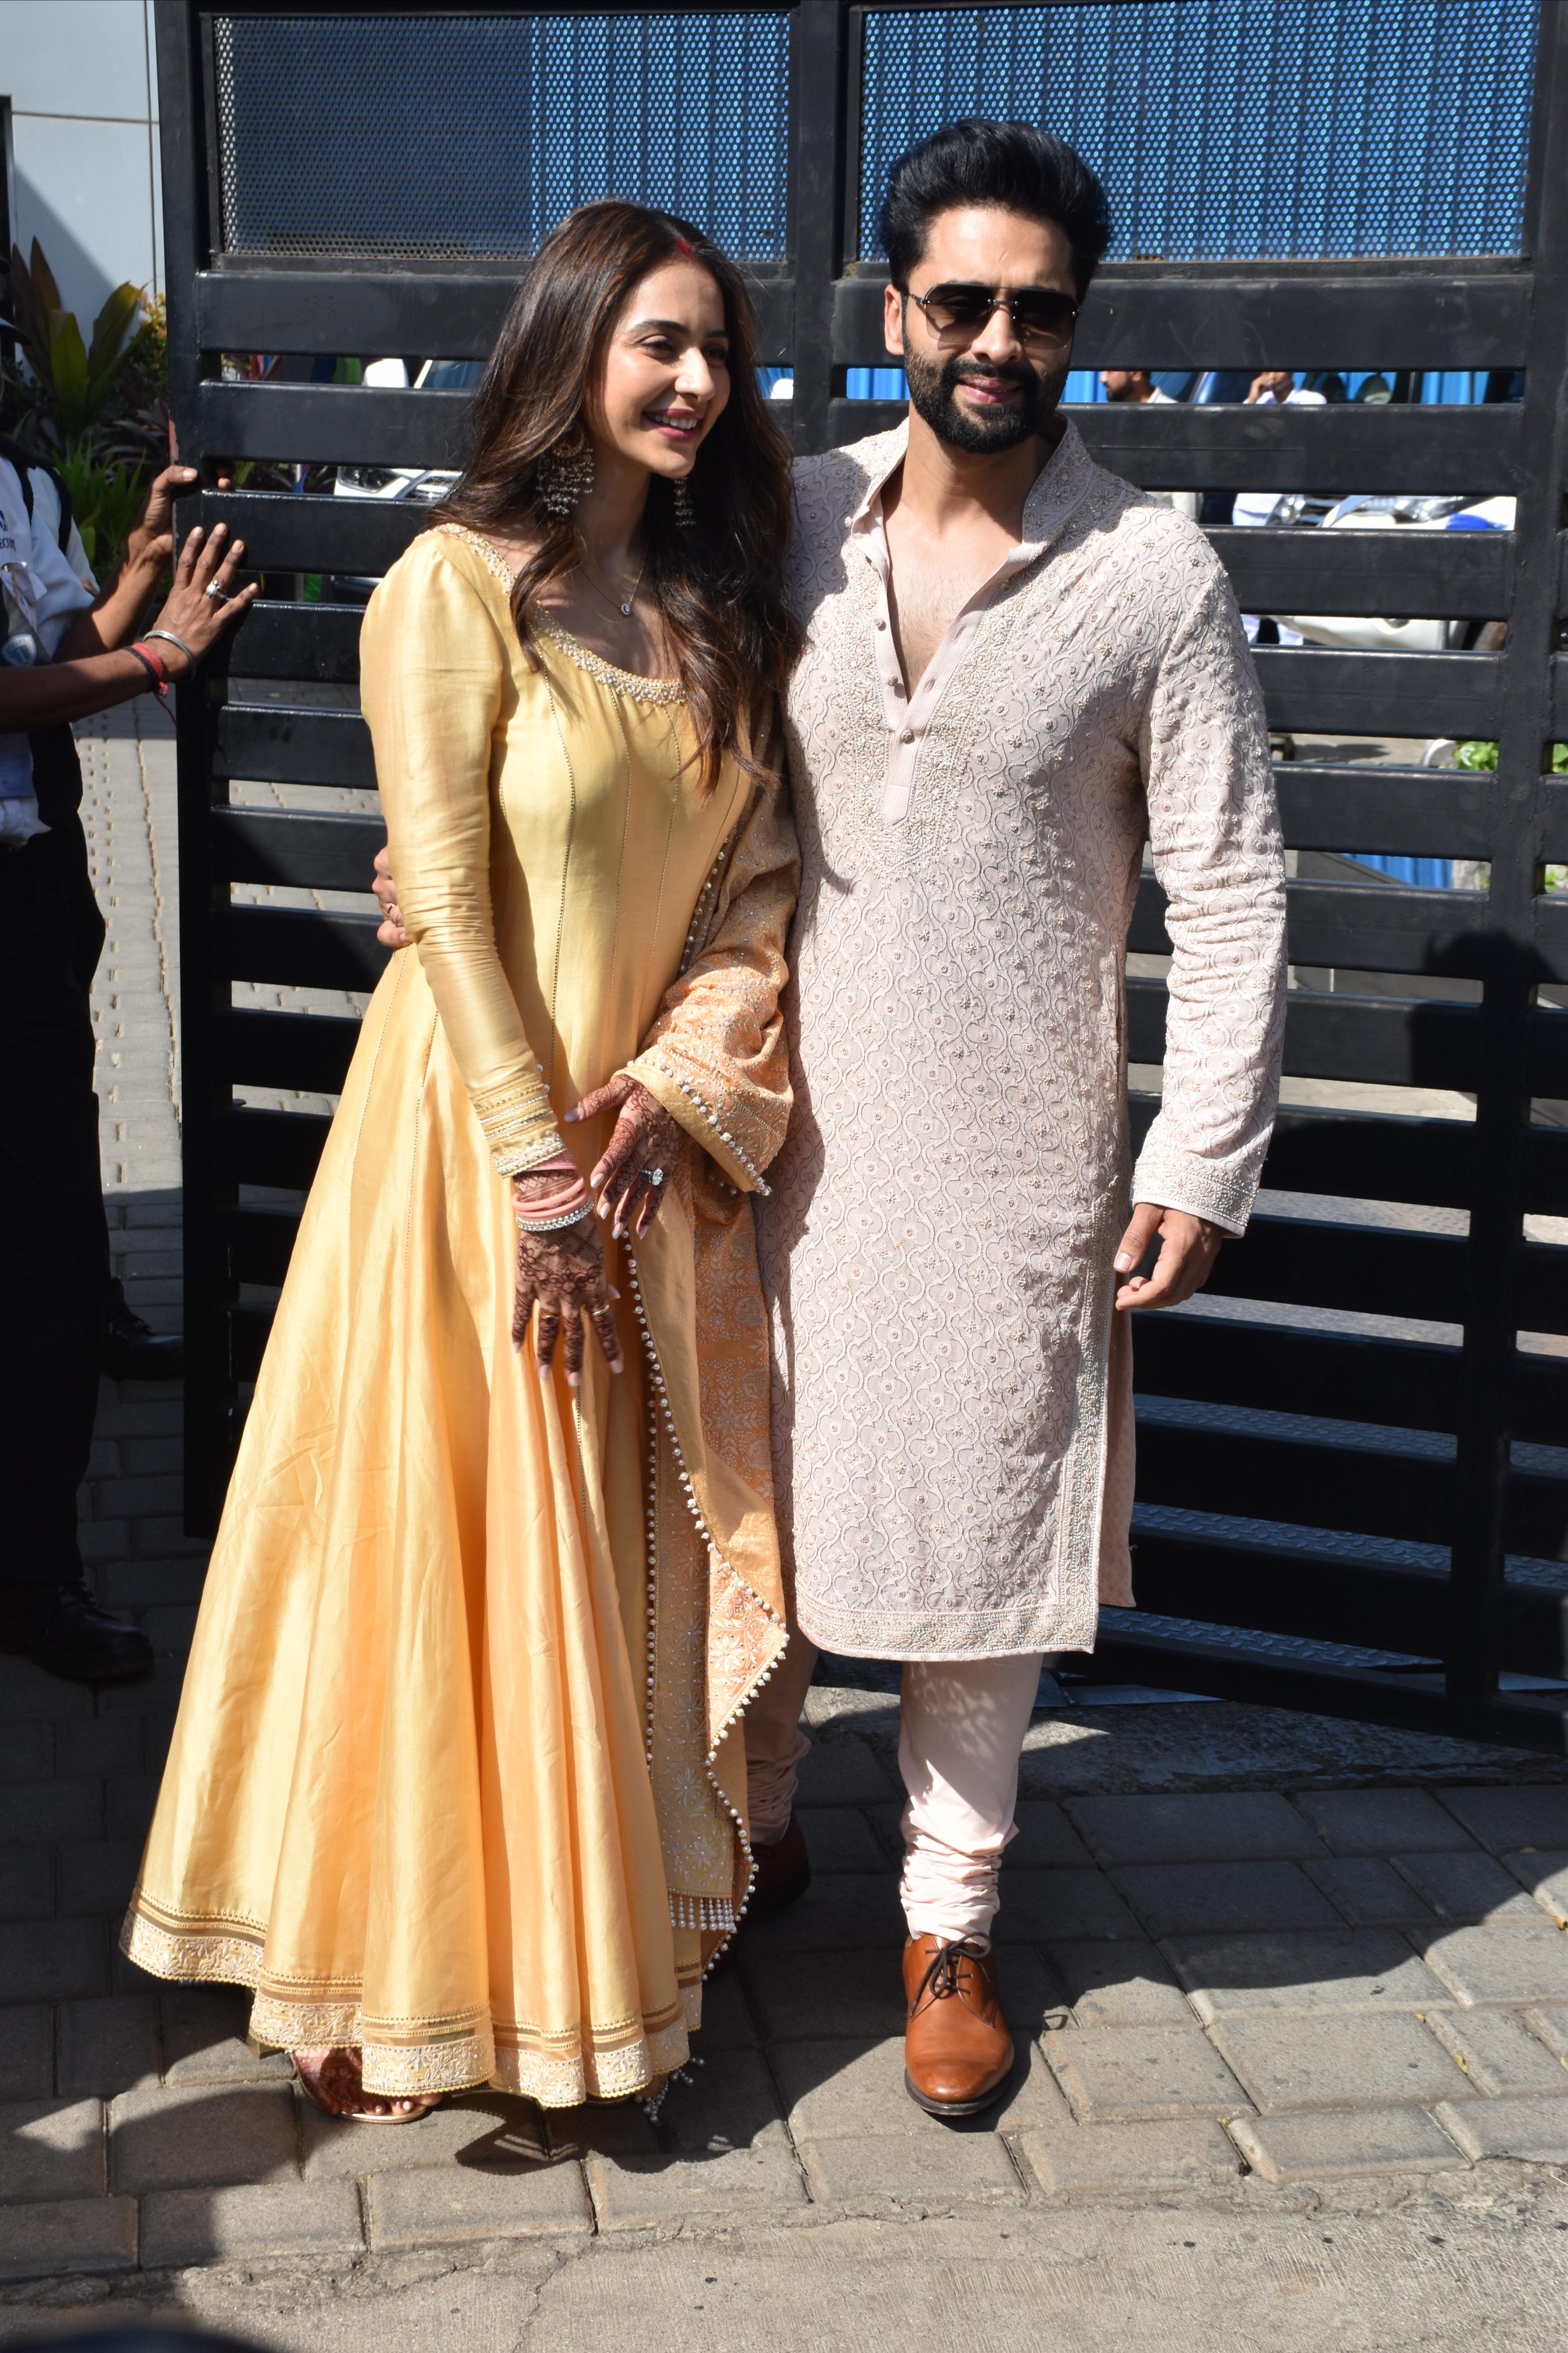 Rakul Preet Singh and Jackky Bhagnani were spotted in the city for the first time since their wedding